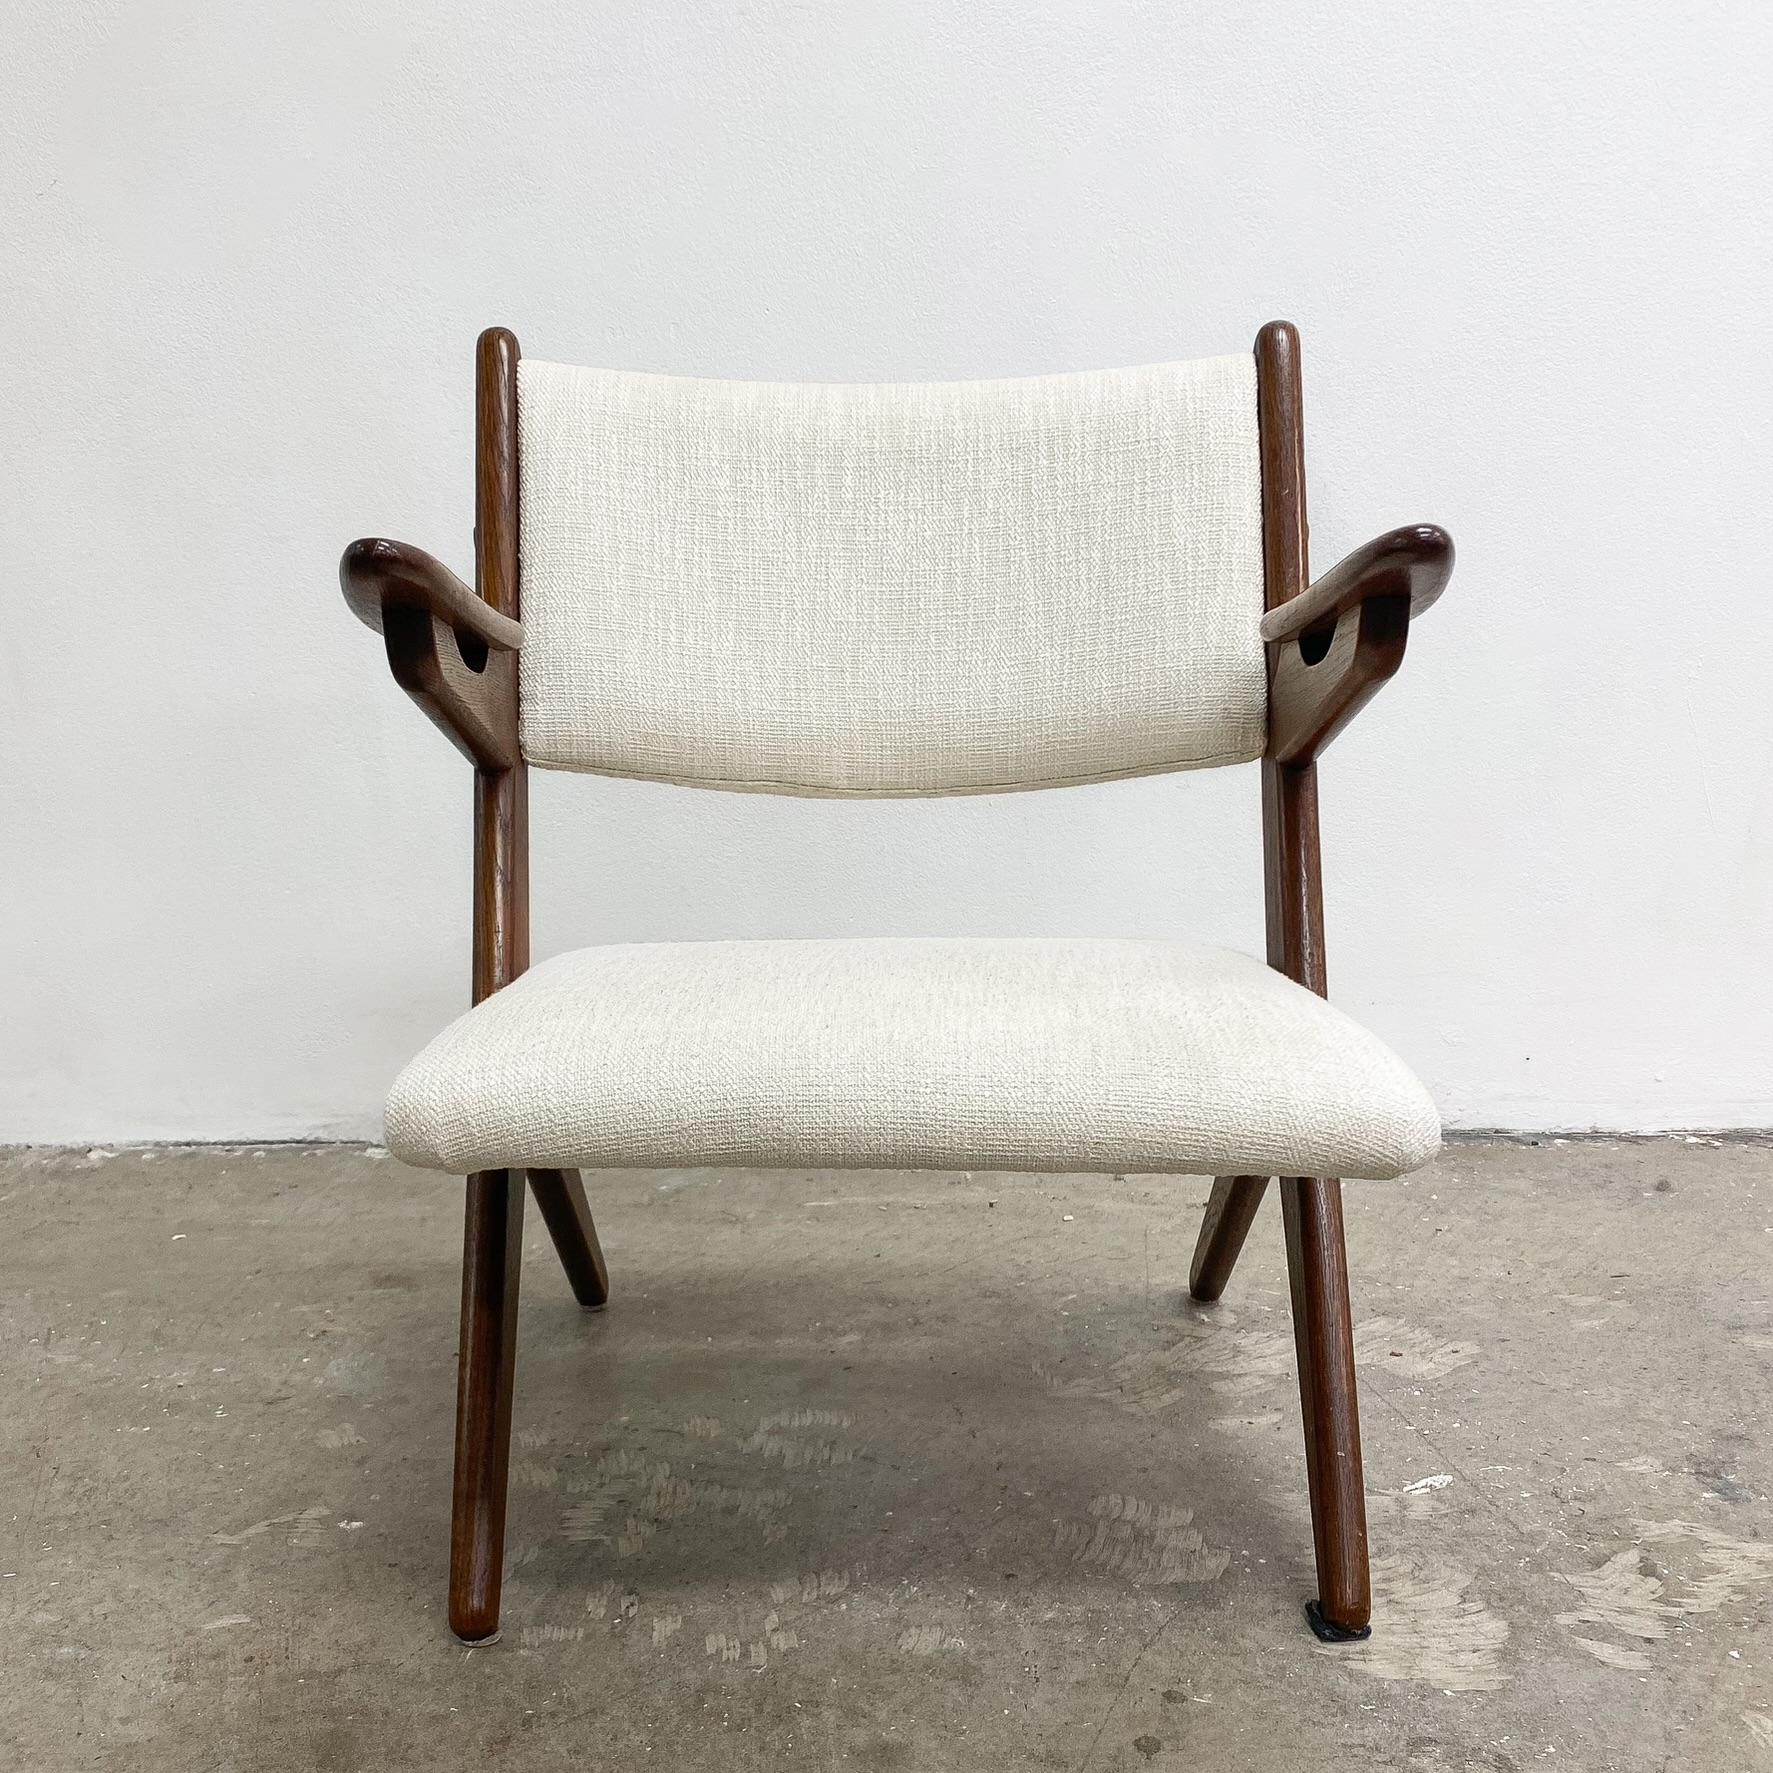 Stunning Mid Century Oak Danish Armchair By Arne Hovmand Olsen for Komfort. The perfect addition to any mid-century décor. In good condition and recently upholstered.